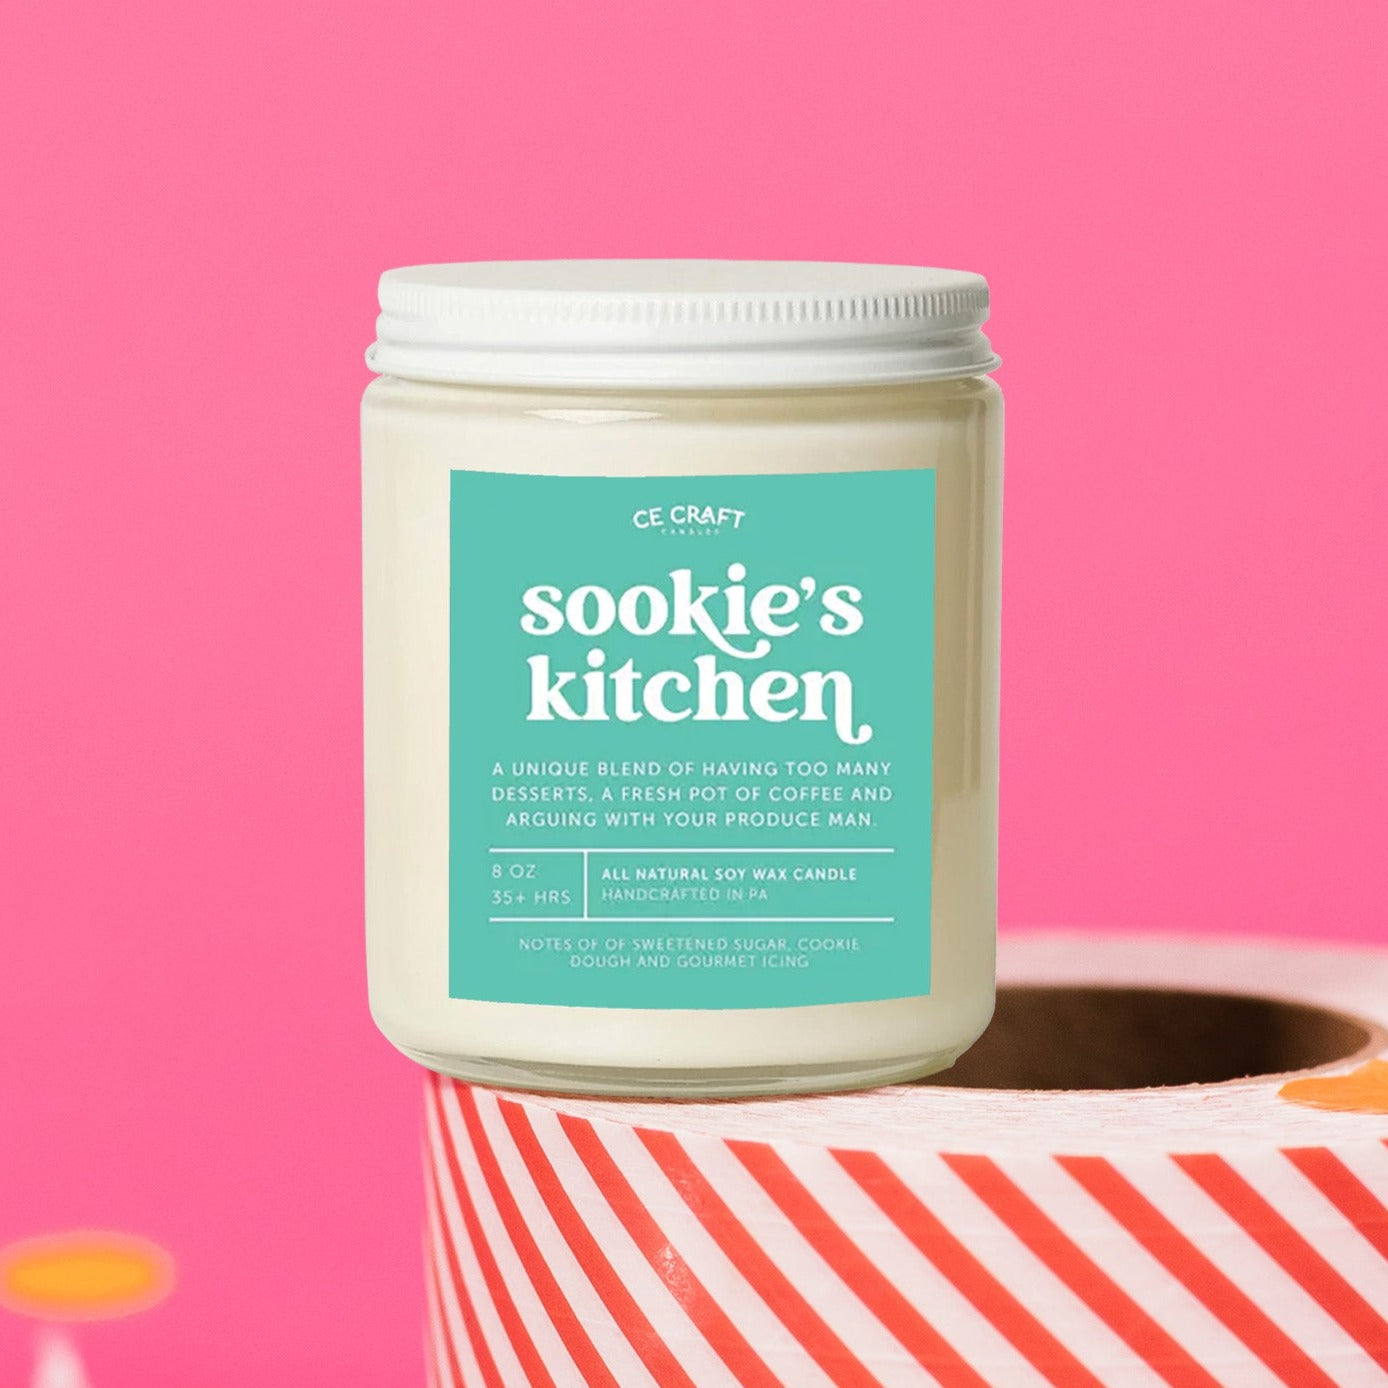 On a hot pink background sits a candle on a red and white packing tape with colorful confetti and white crinkle scattered around. It is has a mint green label with white text. This Sookie's Kitchen Candle has notes of sweetened sugar, cookie dough and gourmet icing and is the perfect scent for your die hard Gilmore Girls Fan! Candle is 8 oz and burns 35 hours.